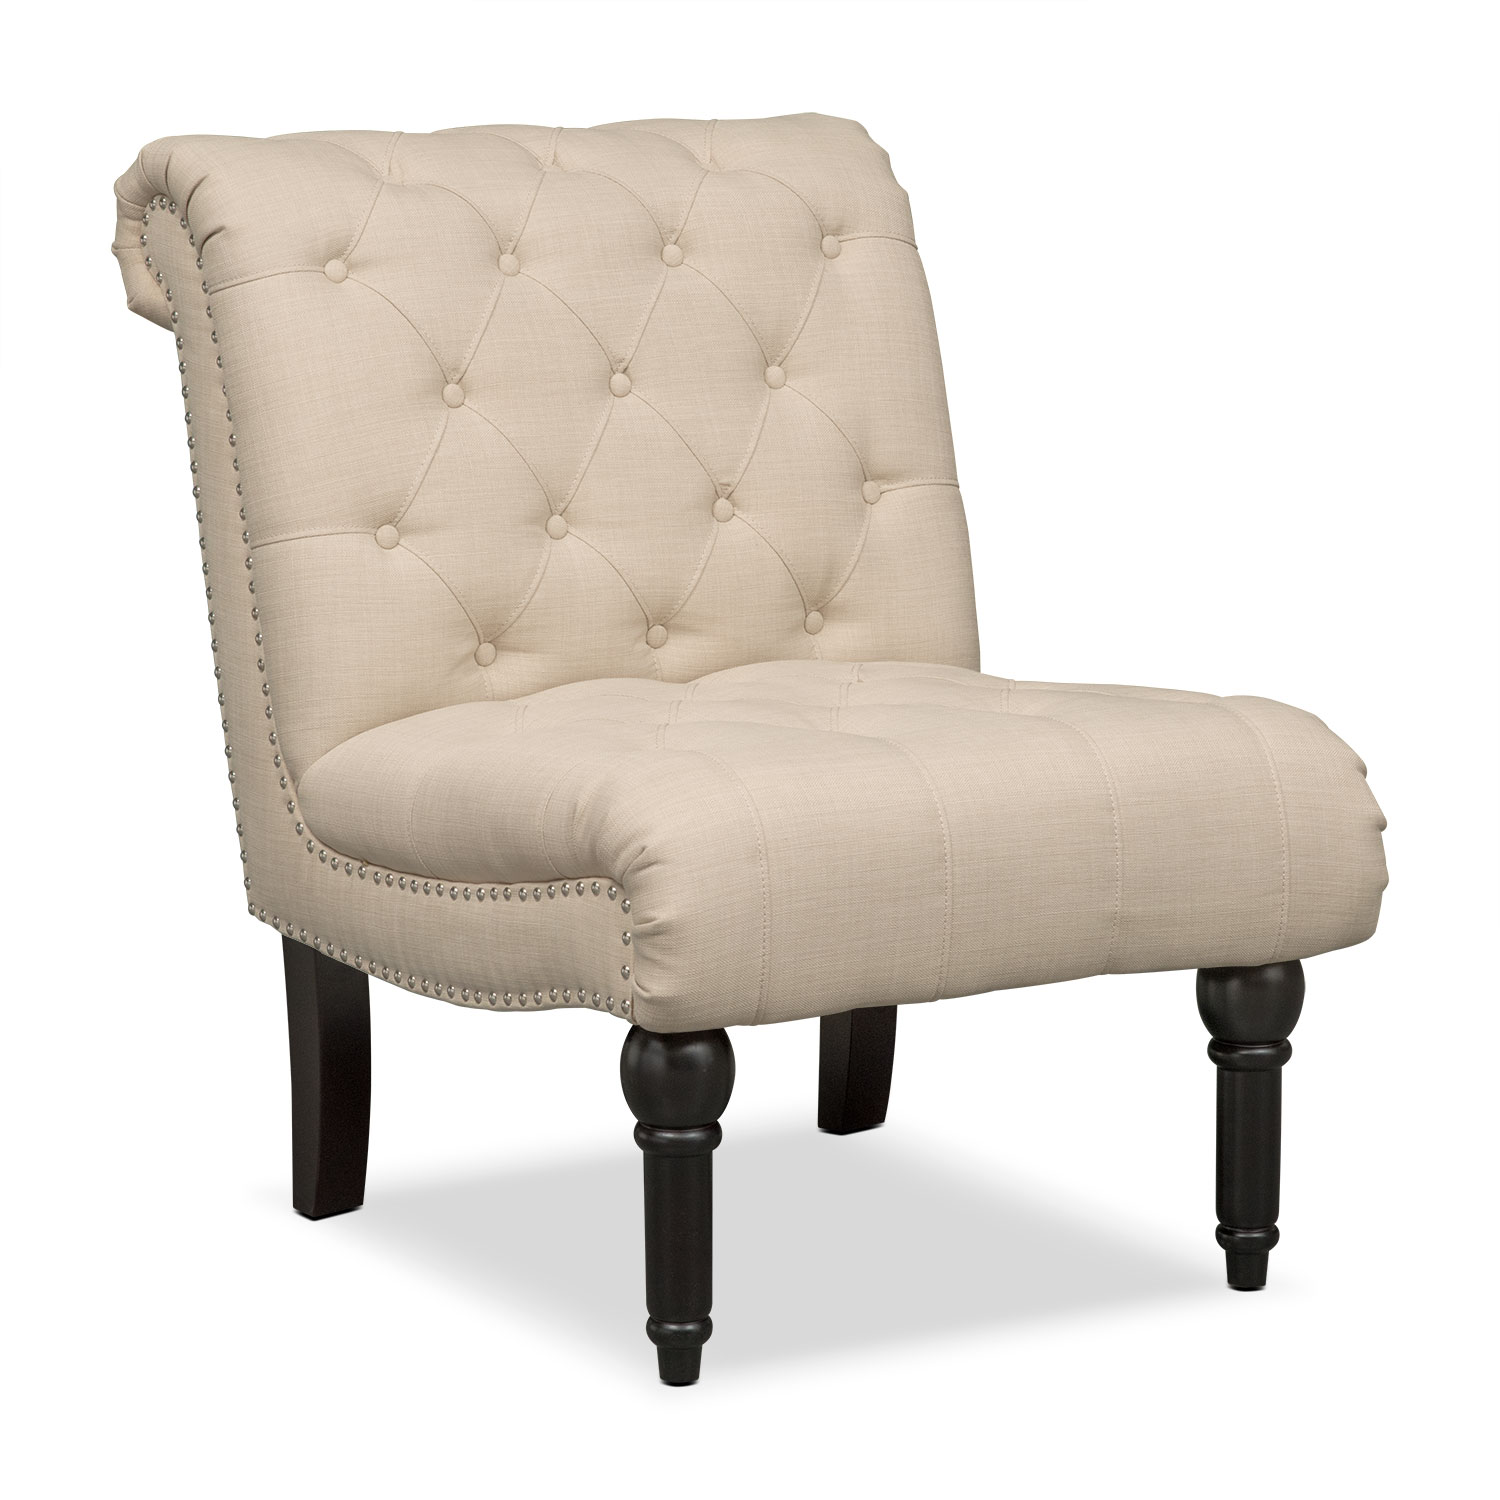 Marisol Sofa and Armless Chair - Beige | Value City Furniture